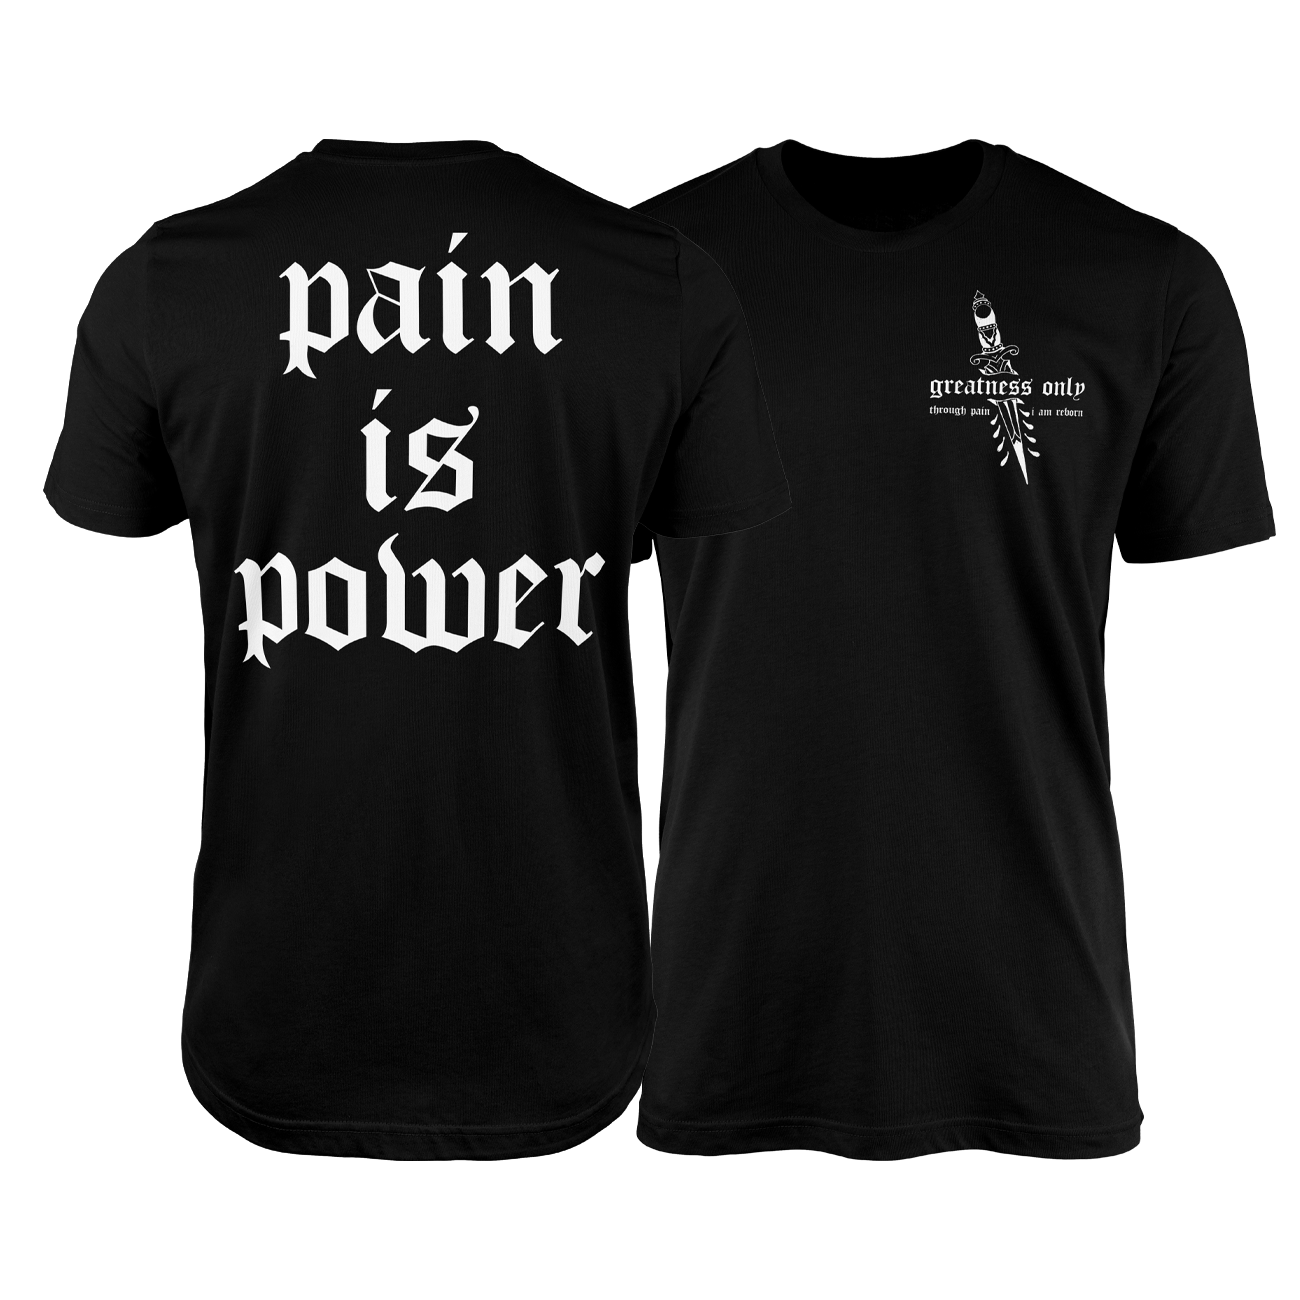 PAIN IS POWER